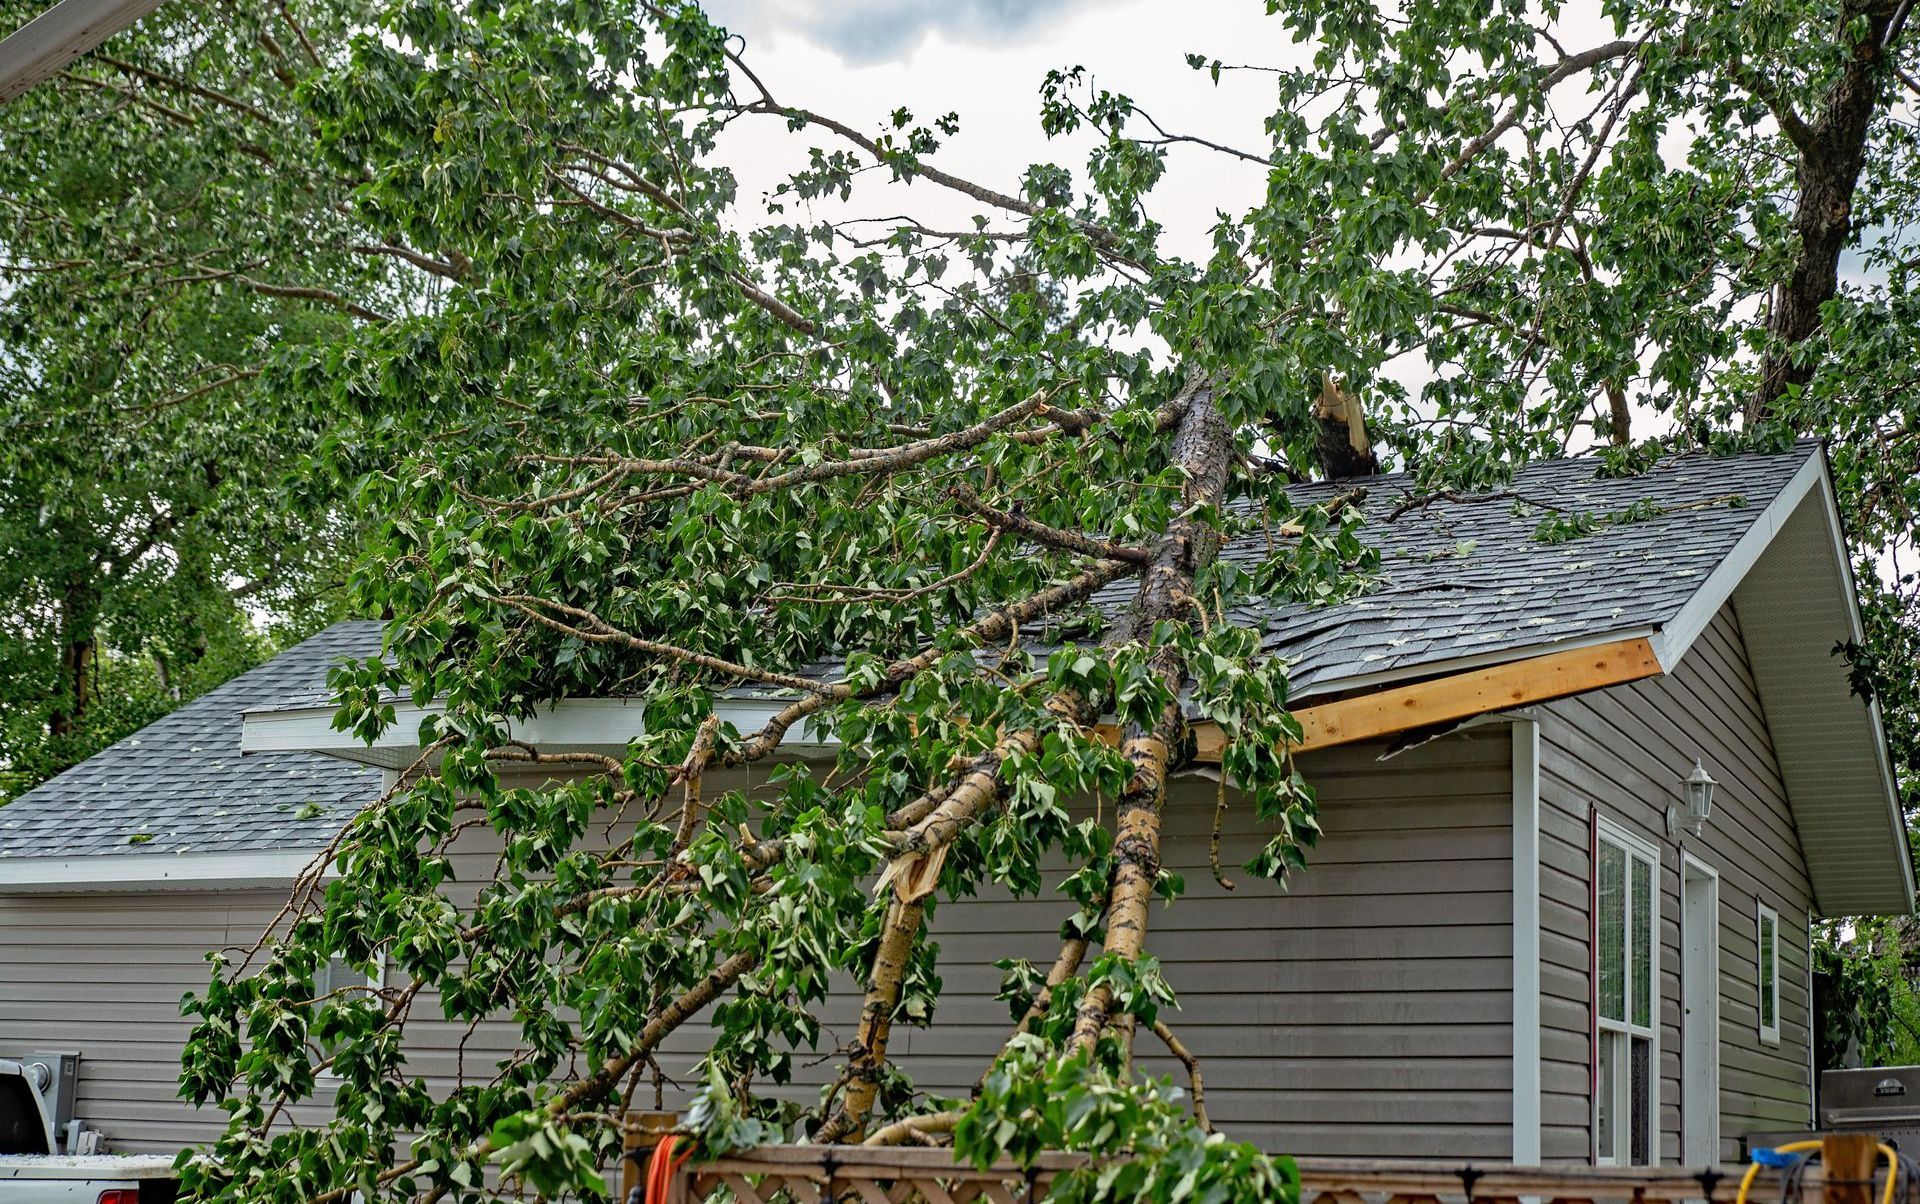 A tree has fallen on the roof of a house image from Washington Roofing Services near Arlington WA